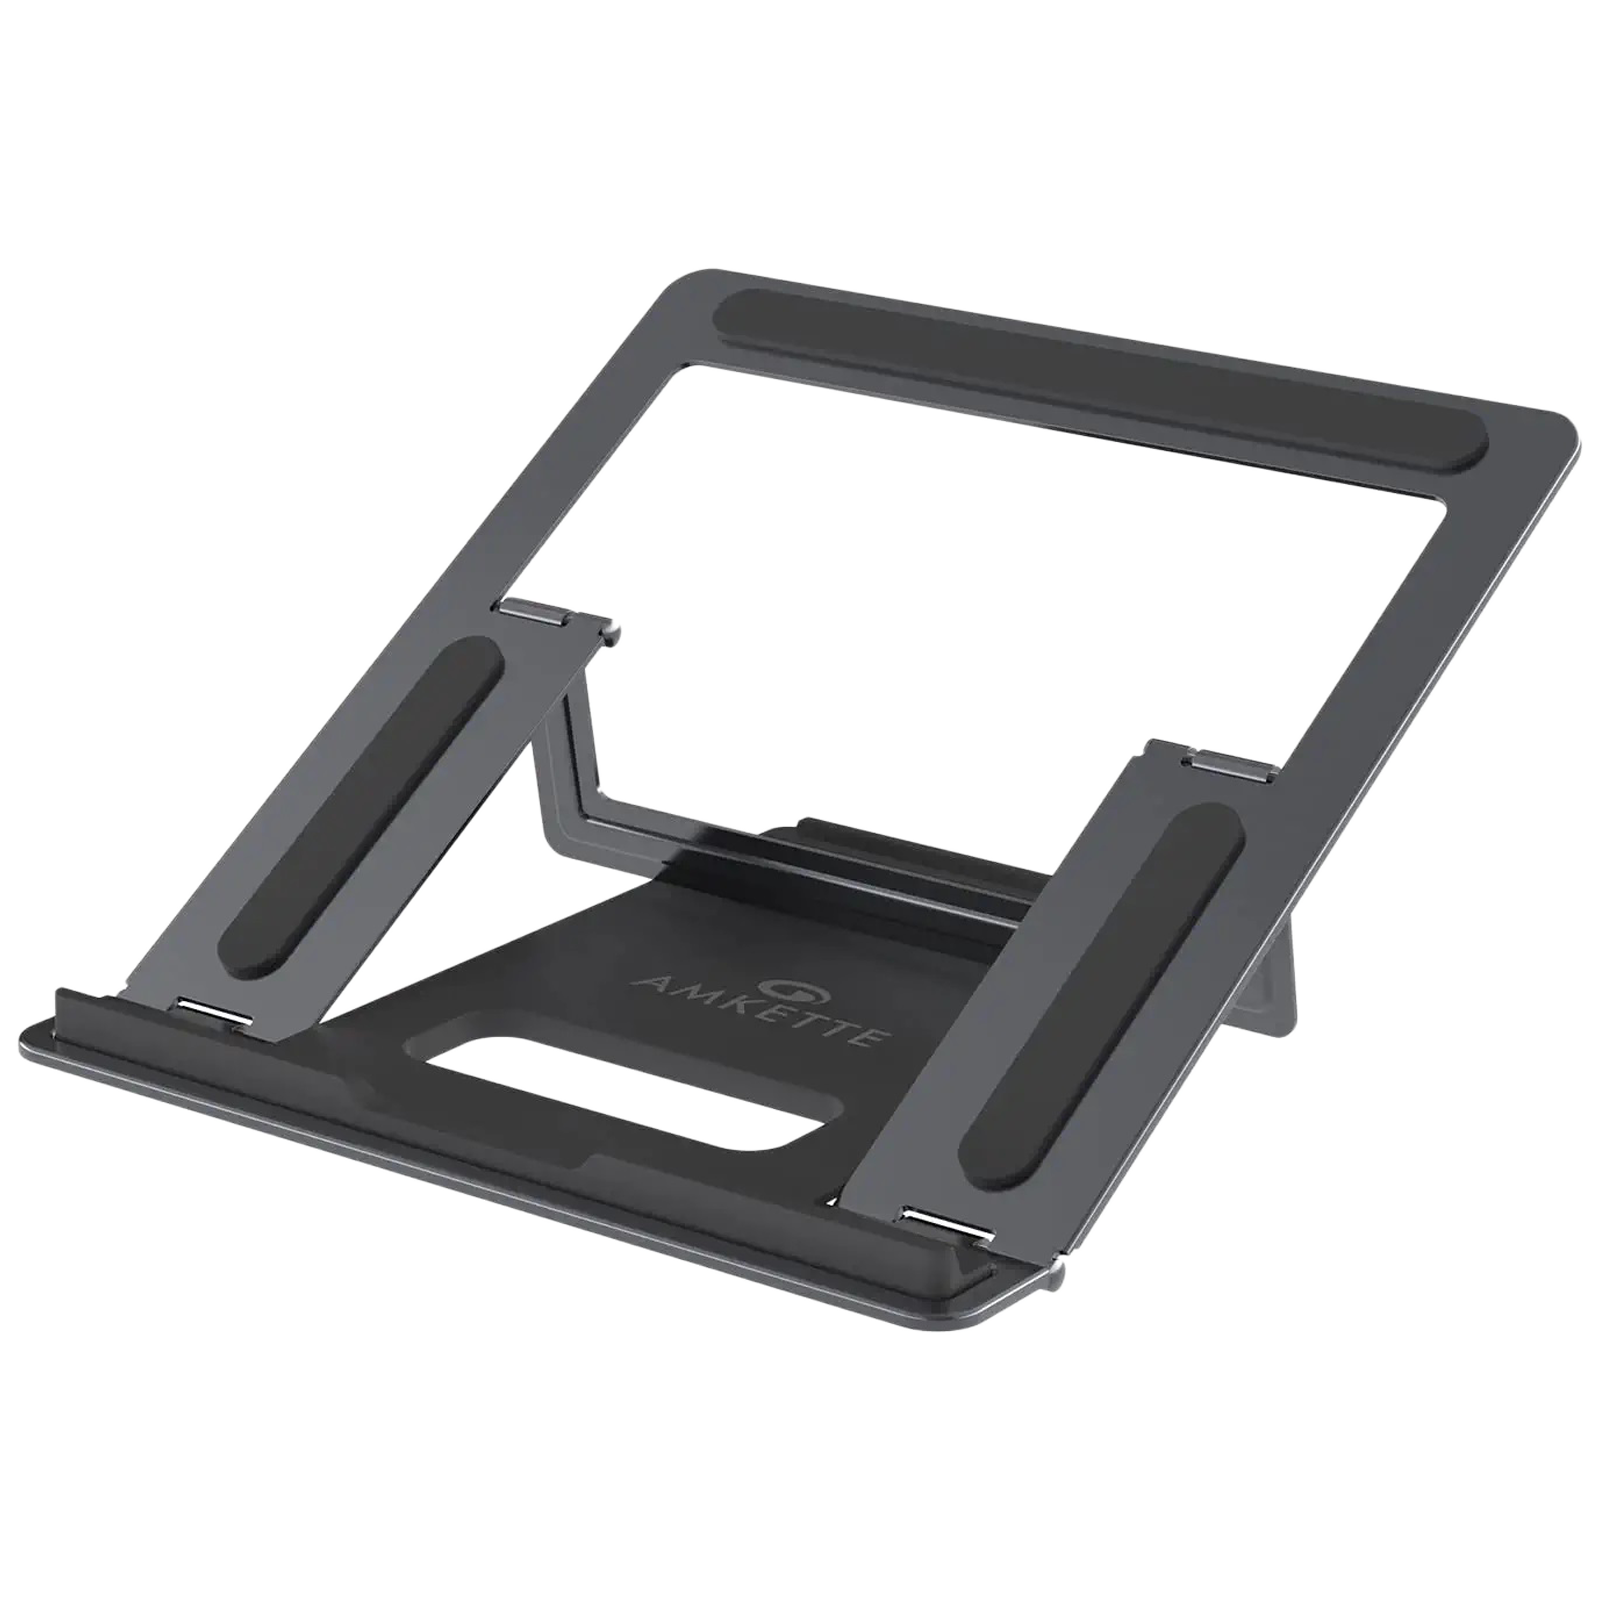 Amkette Ergo Luxe Laptop Stand (4 Level Adjustment, Space Grey)_1